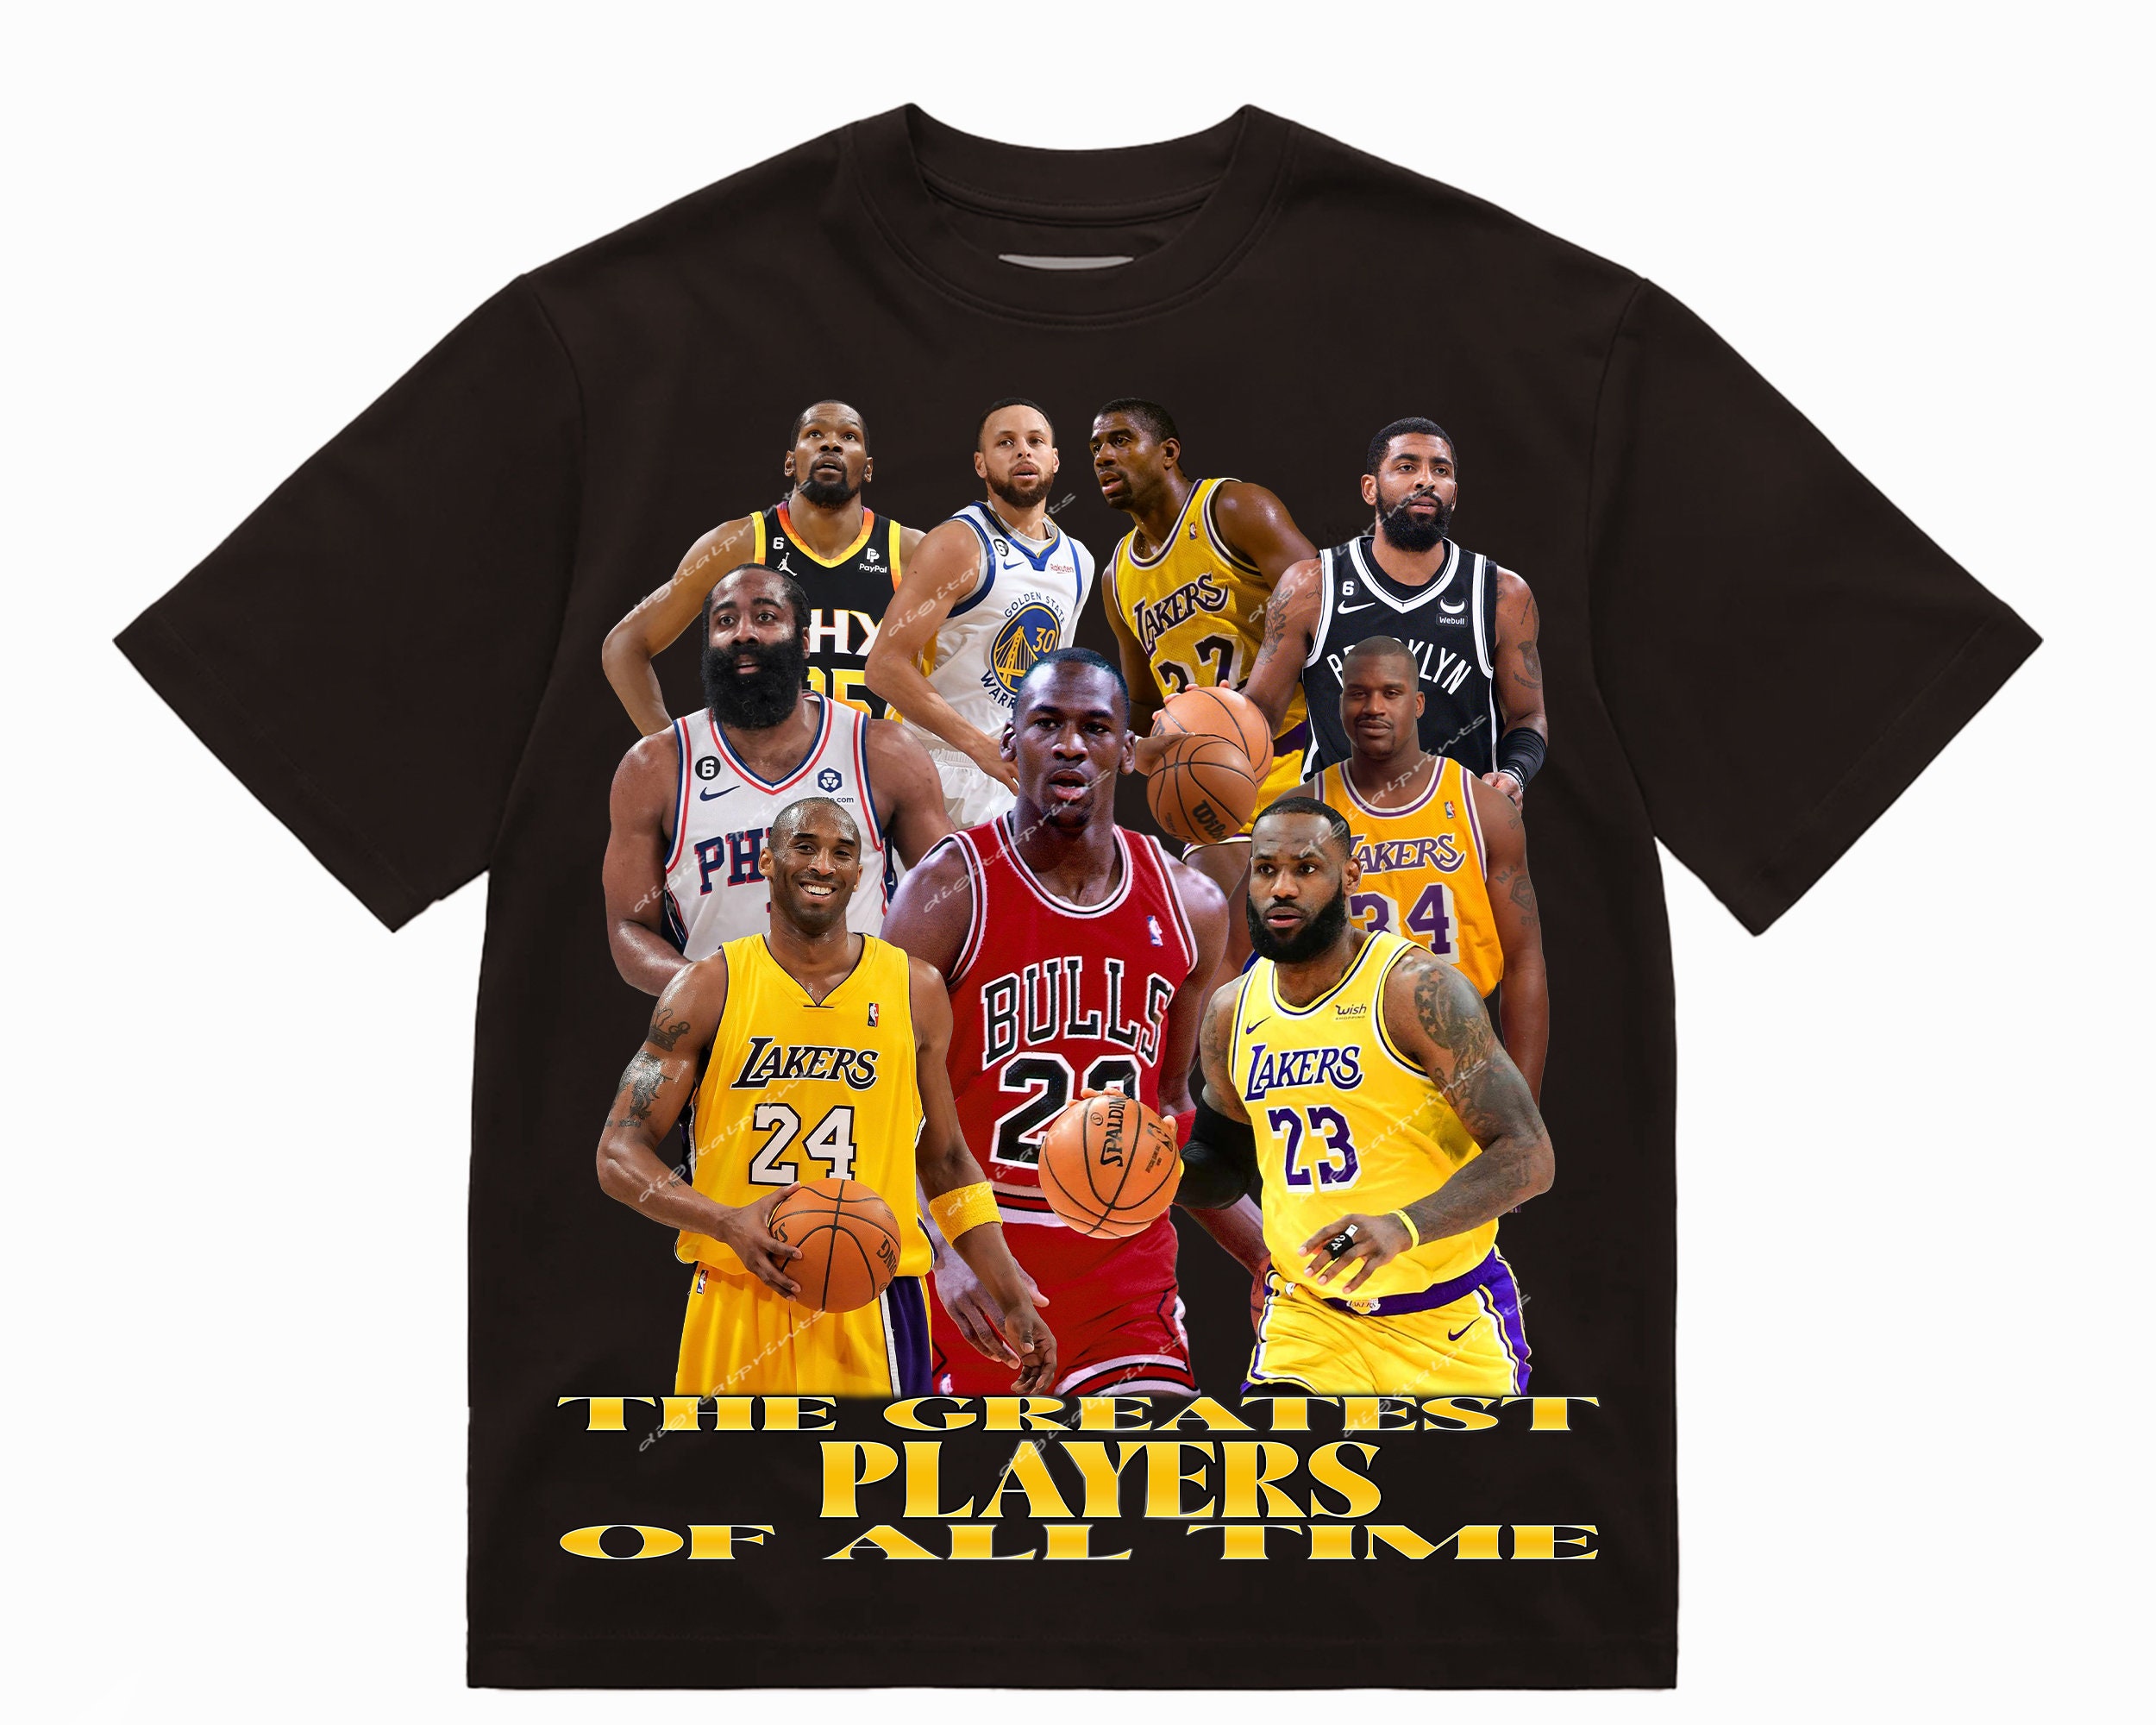 The GOATS Basketball Png / Shirt Design Ready to Print - Etsy